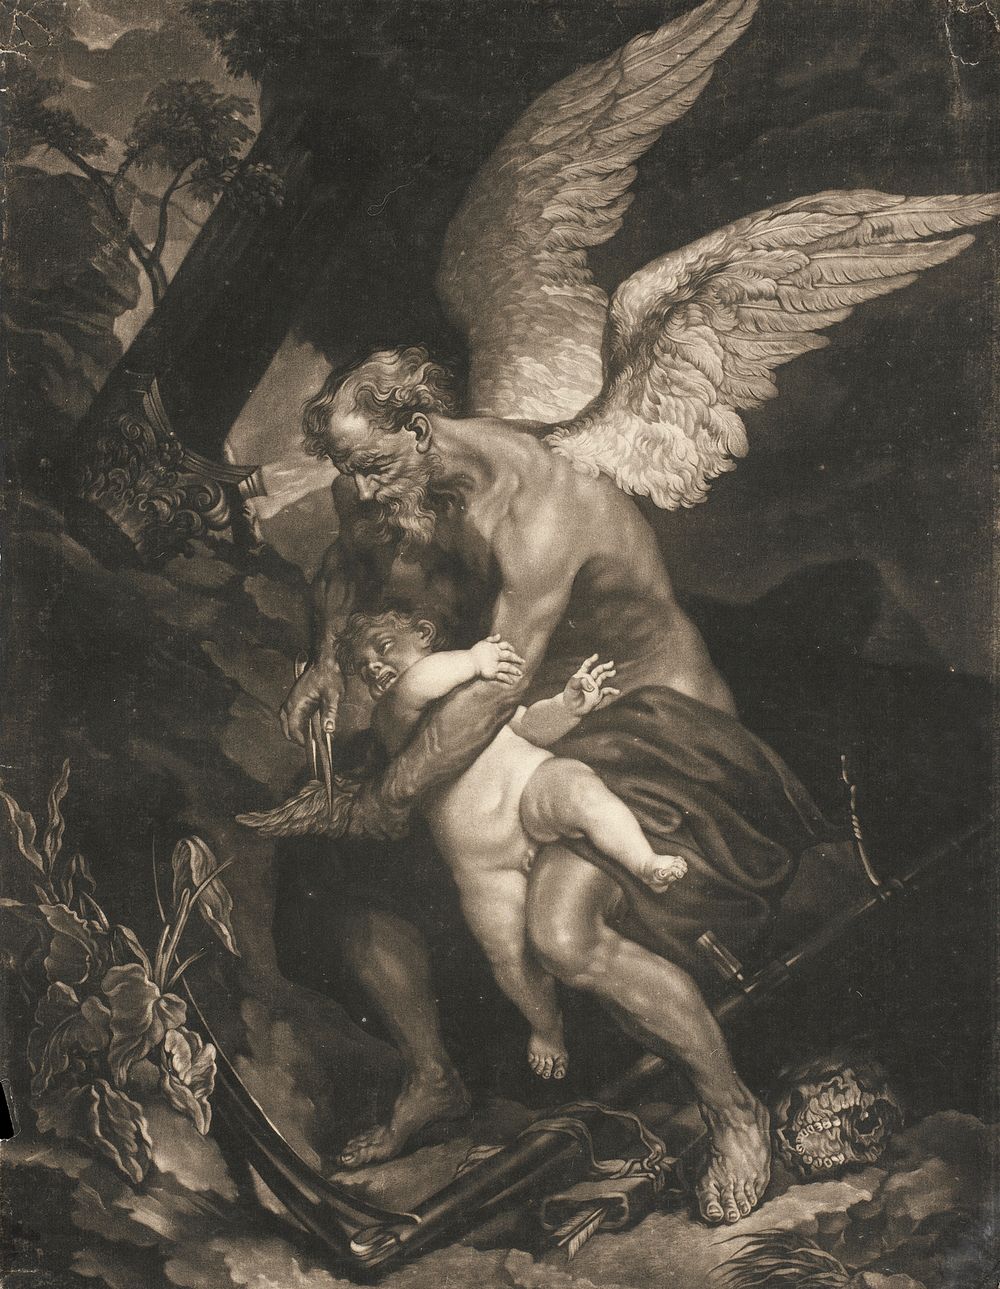 Time Clipping Cupid's Wings by James McArdell 1765 and Sir Anthony van Dyck